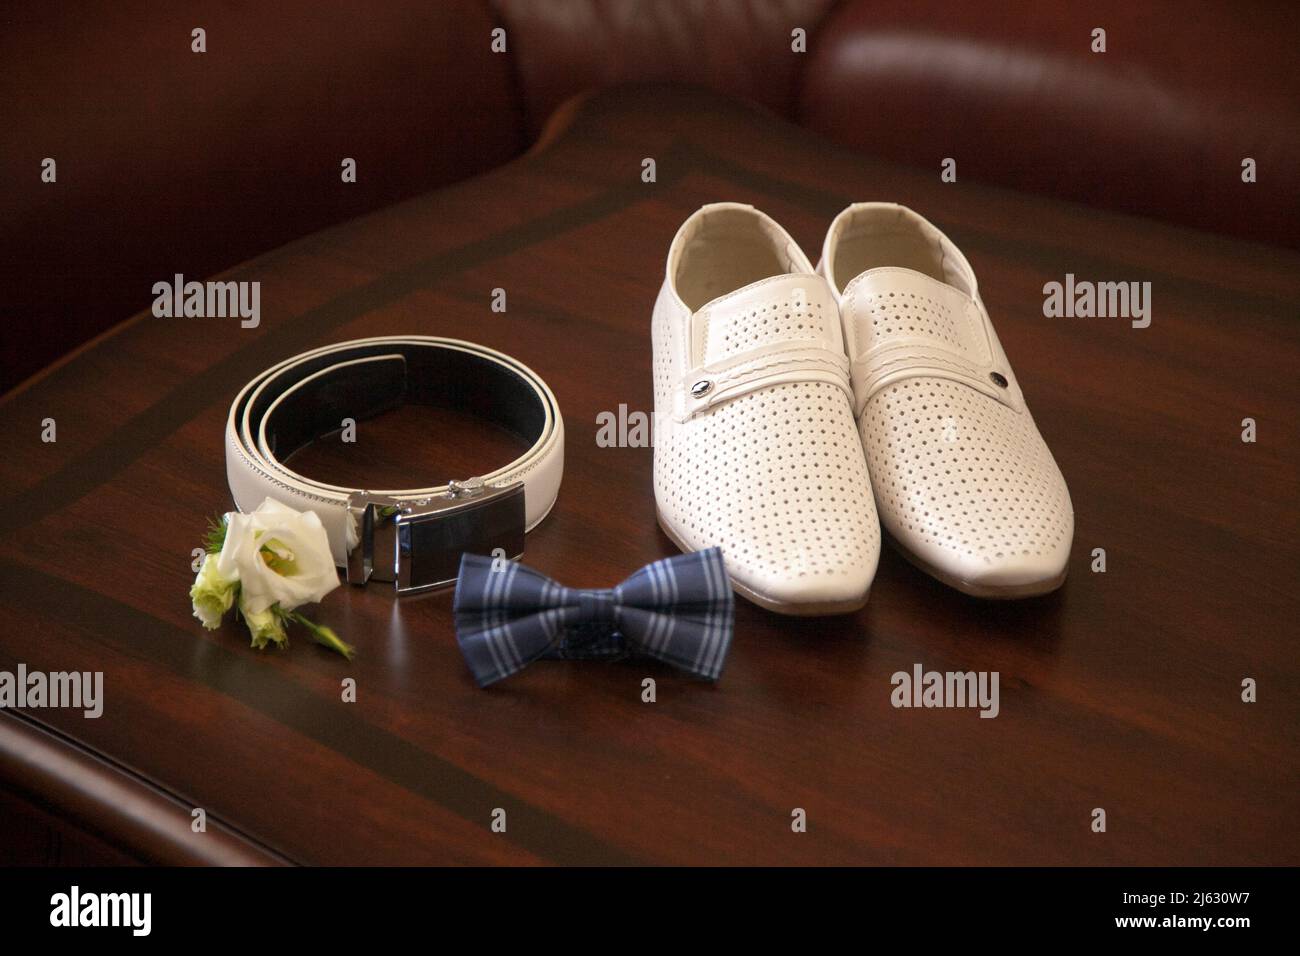 Groom's white shoes, belt, bow tie and boutonniere, top view. Groom's morning, wedding details, preparation for the wedding ceremony. Stock Photo